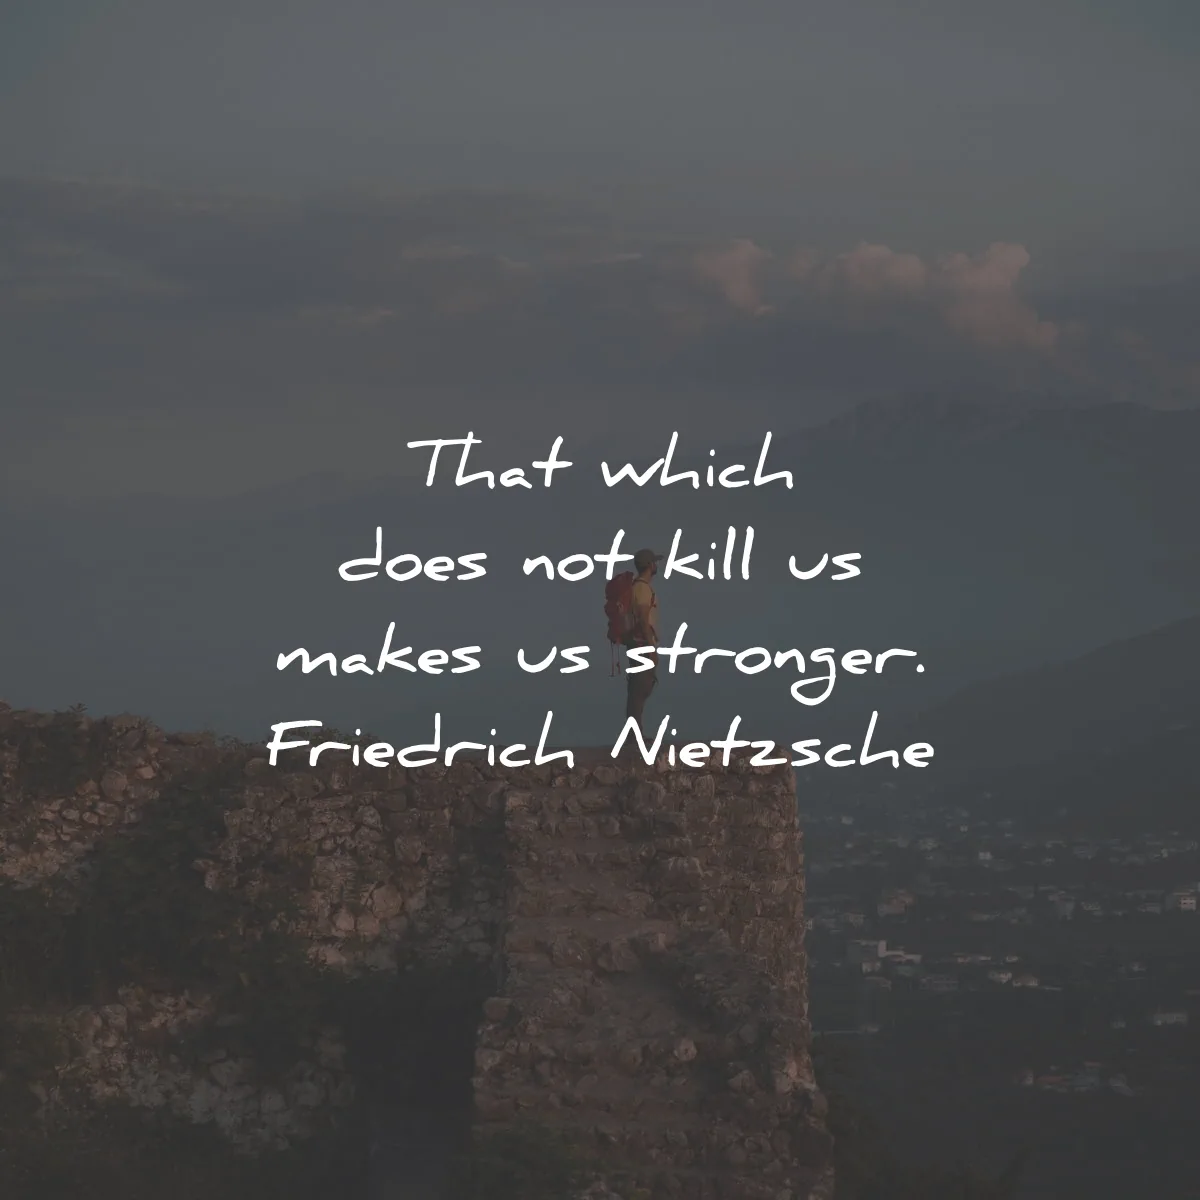 famous quotes which does not kill makes stronger friedrich nietzsche wisdom